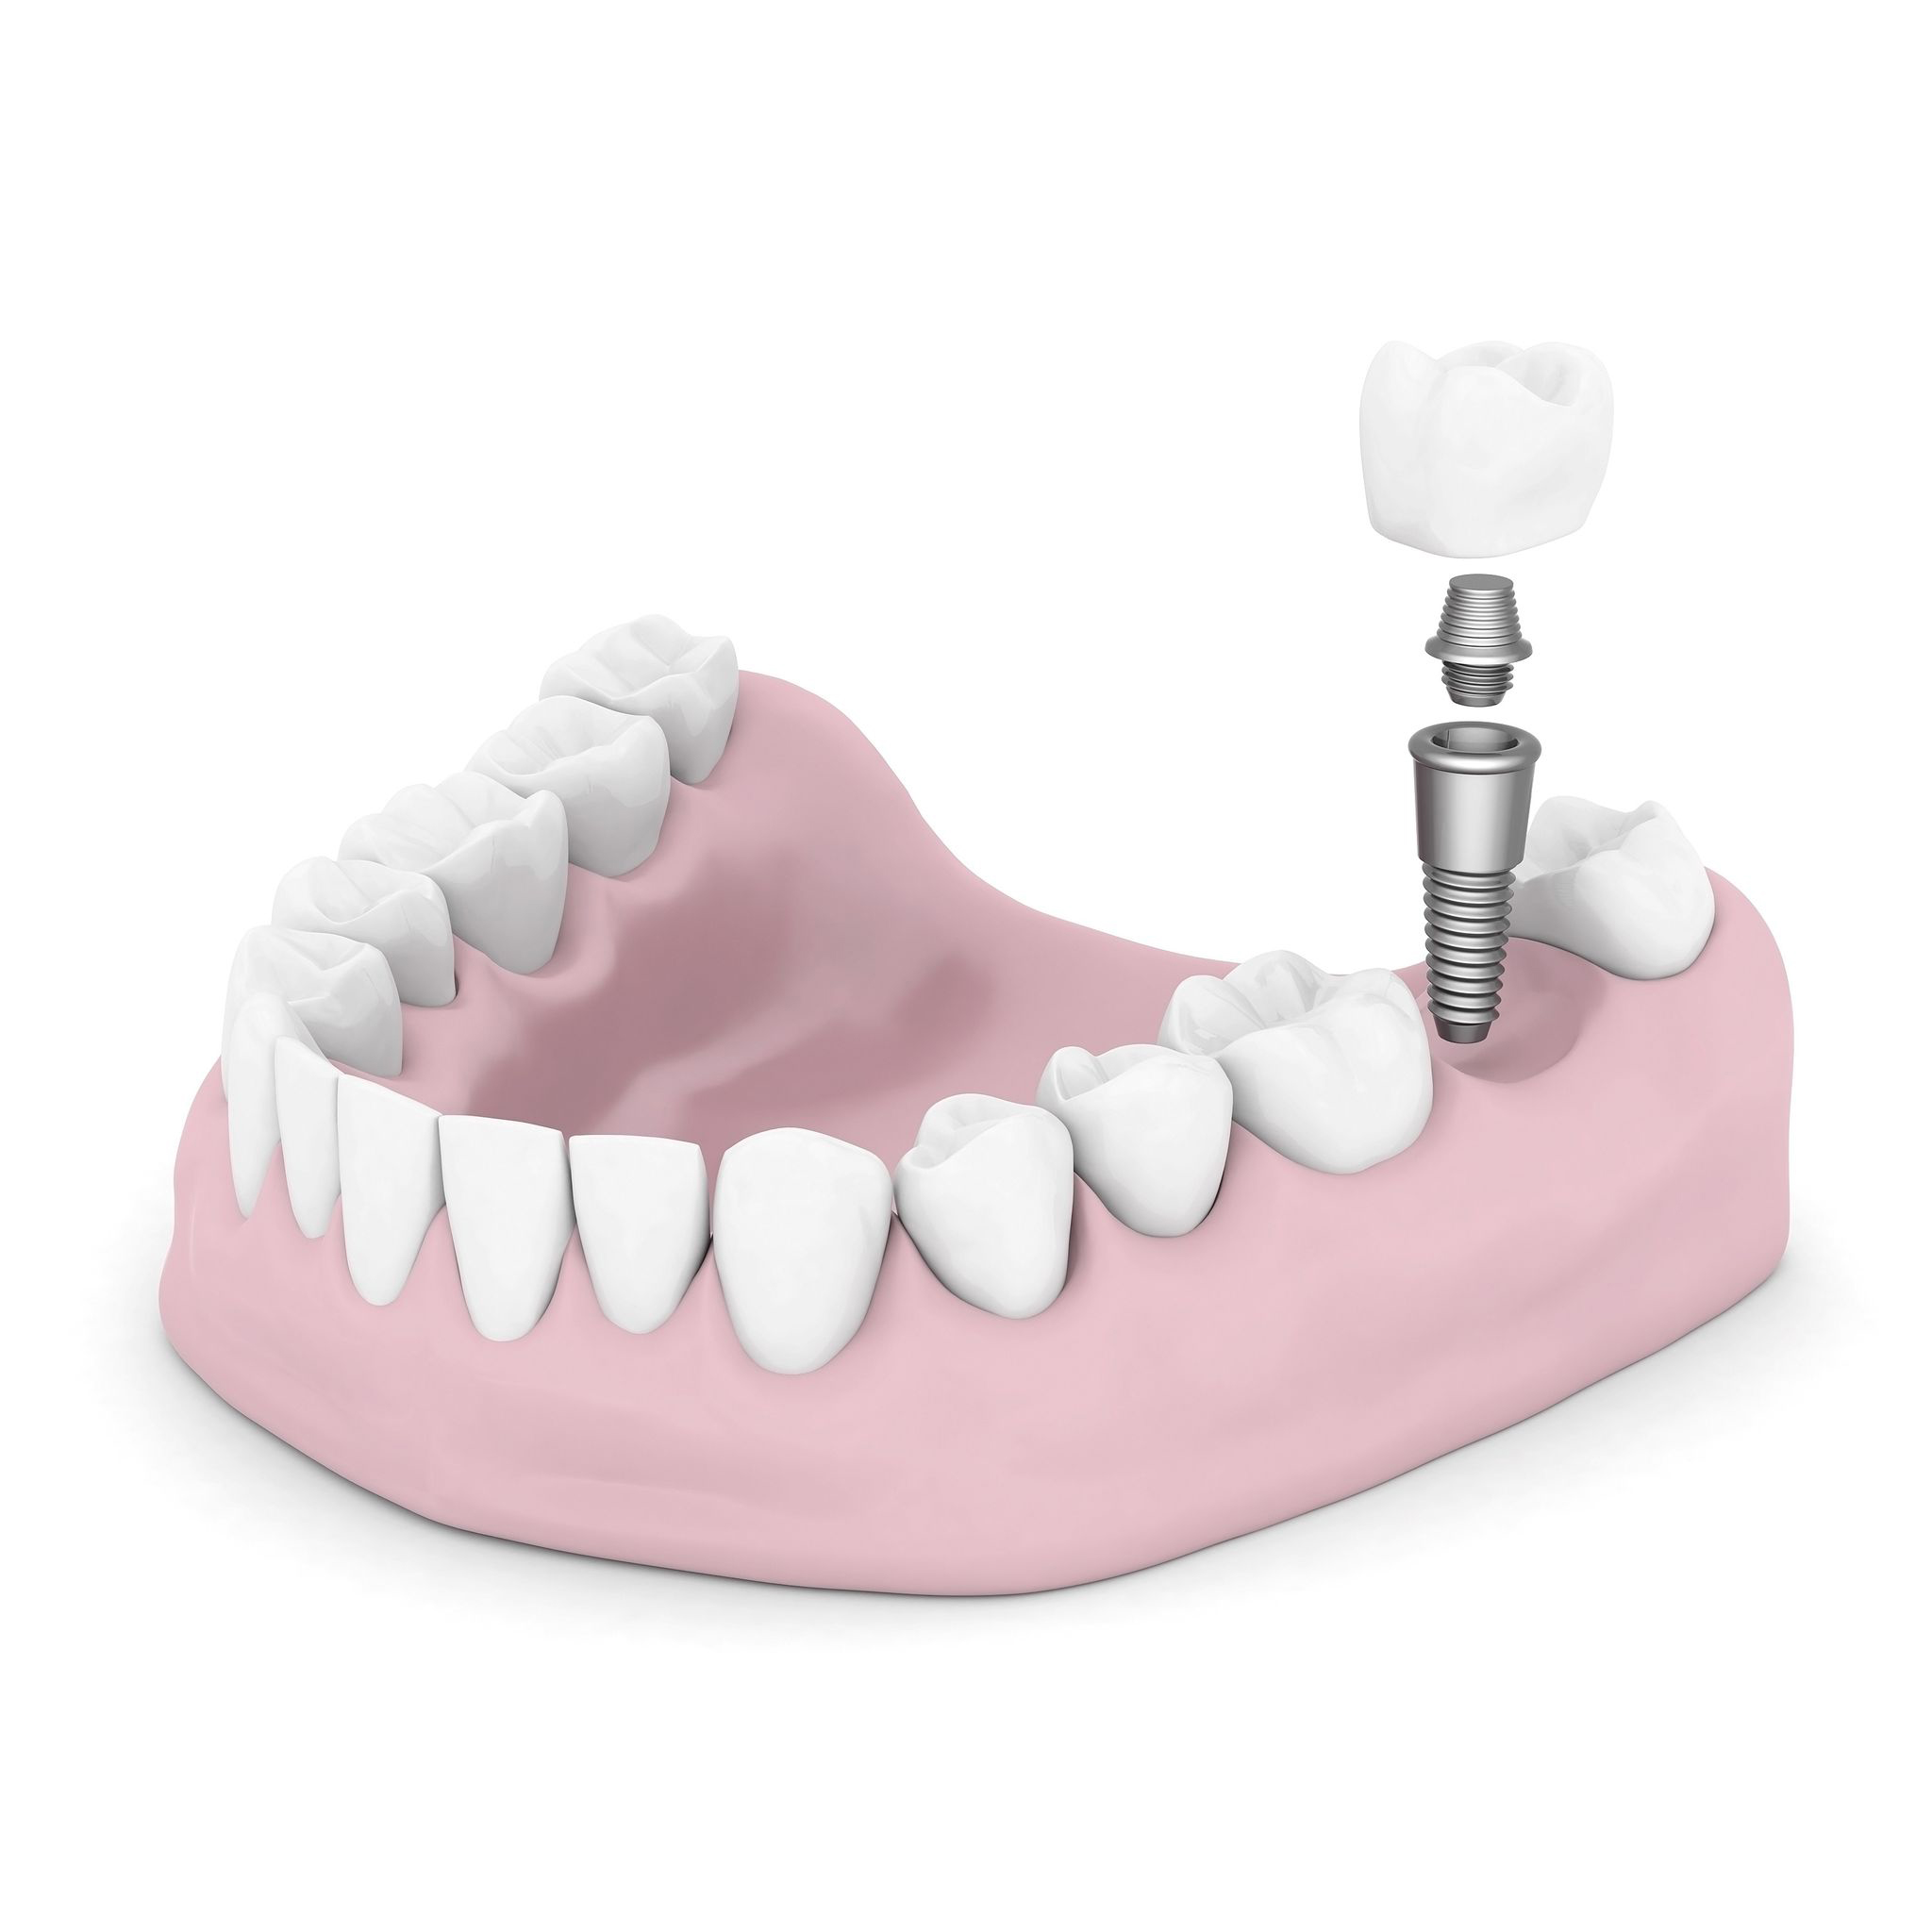 Where can I get Dental Implants in Costa Mesa?